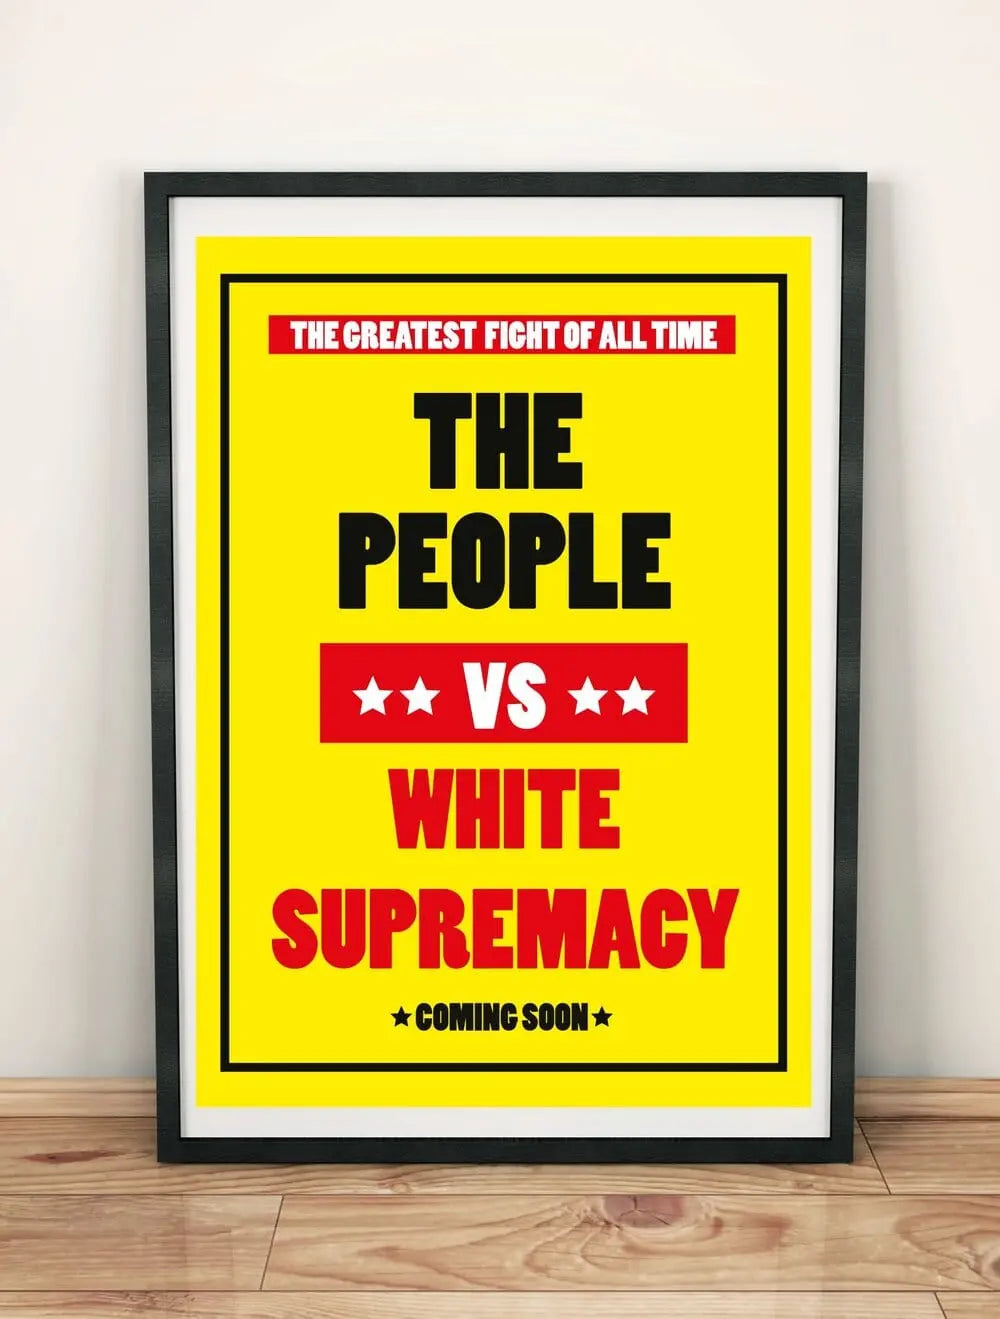 Nadina Ali Poster - The People vs White Supremacy - A3 - Migration Museum Shop